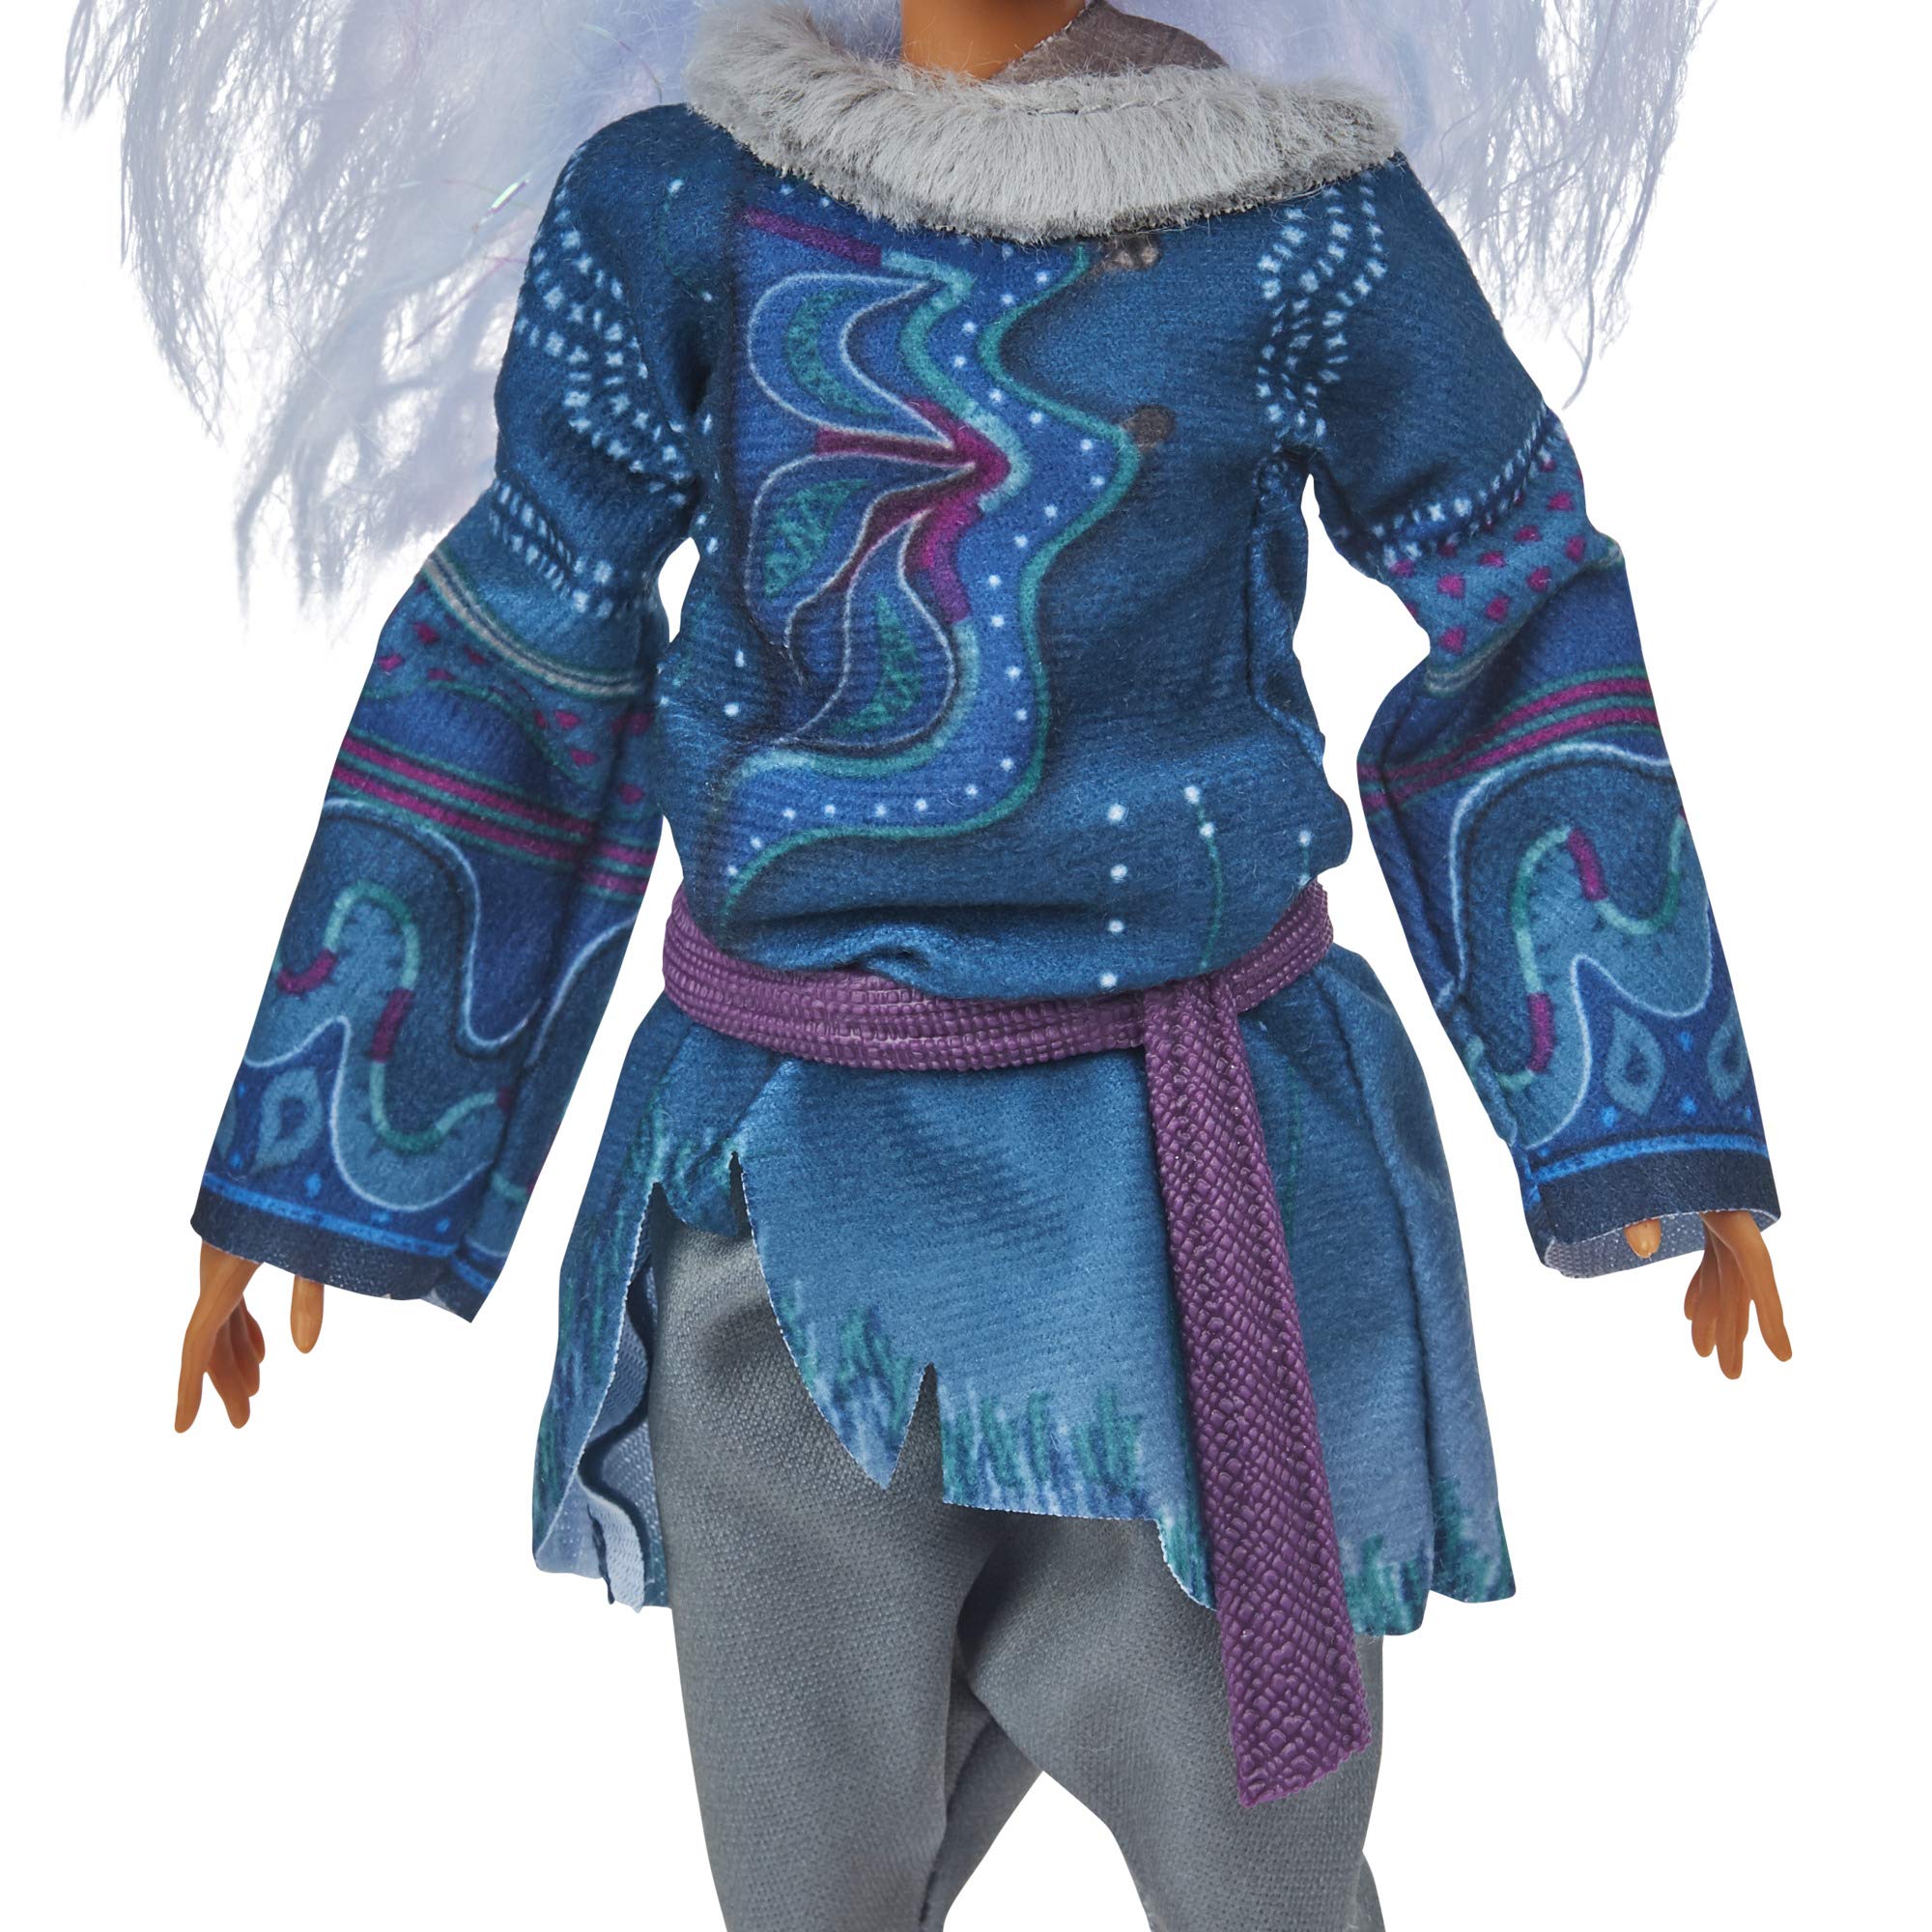 Disney Sisu Human Fashion Doll with Lavender Hair and Movie-Inspired Clothes Inspired by Disney's Raya and The Last Dragon Movie, Toy for 3 Year Old Kids and Up